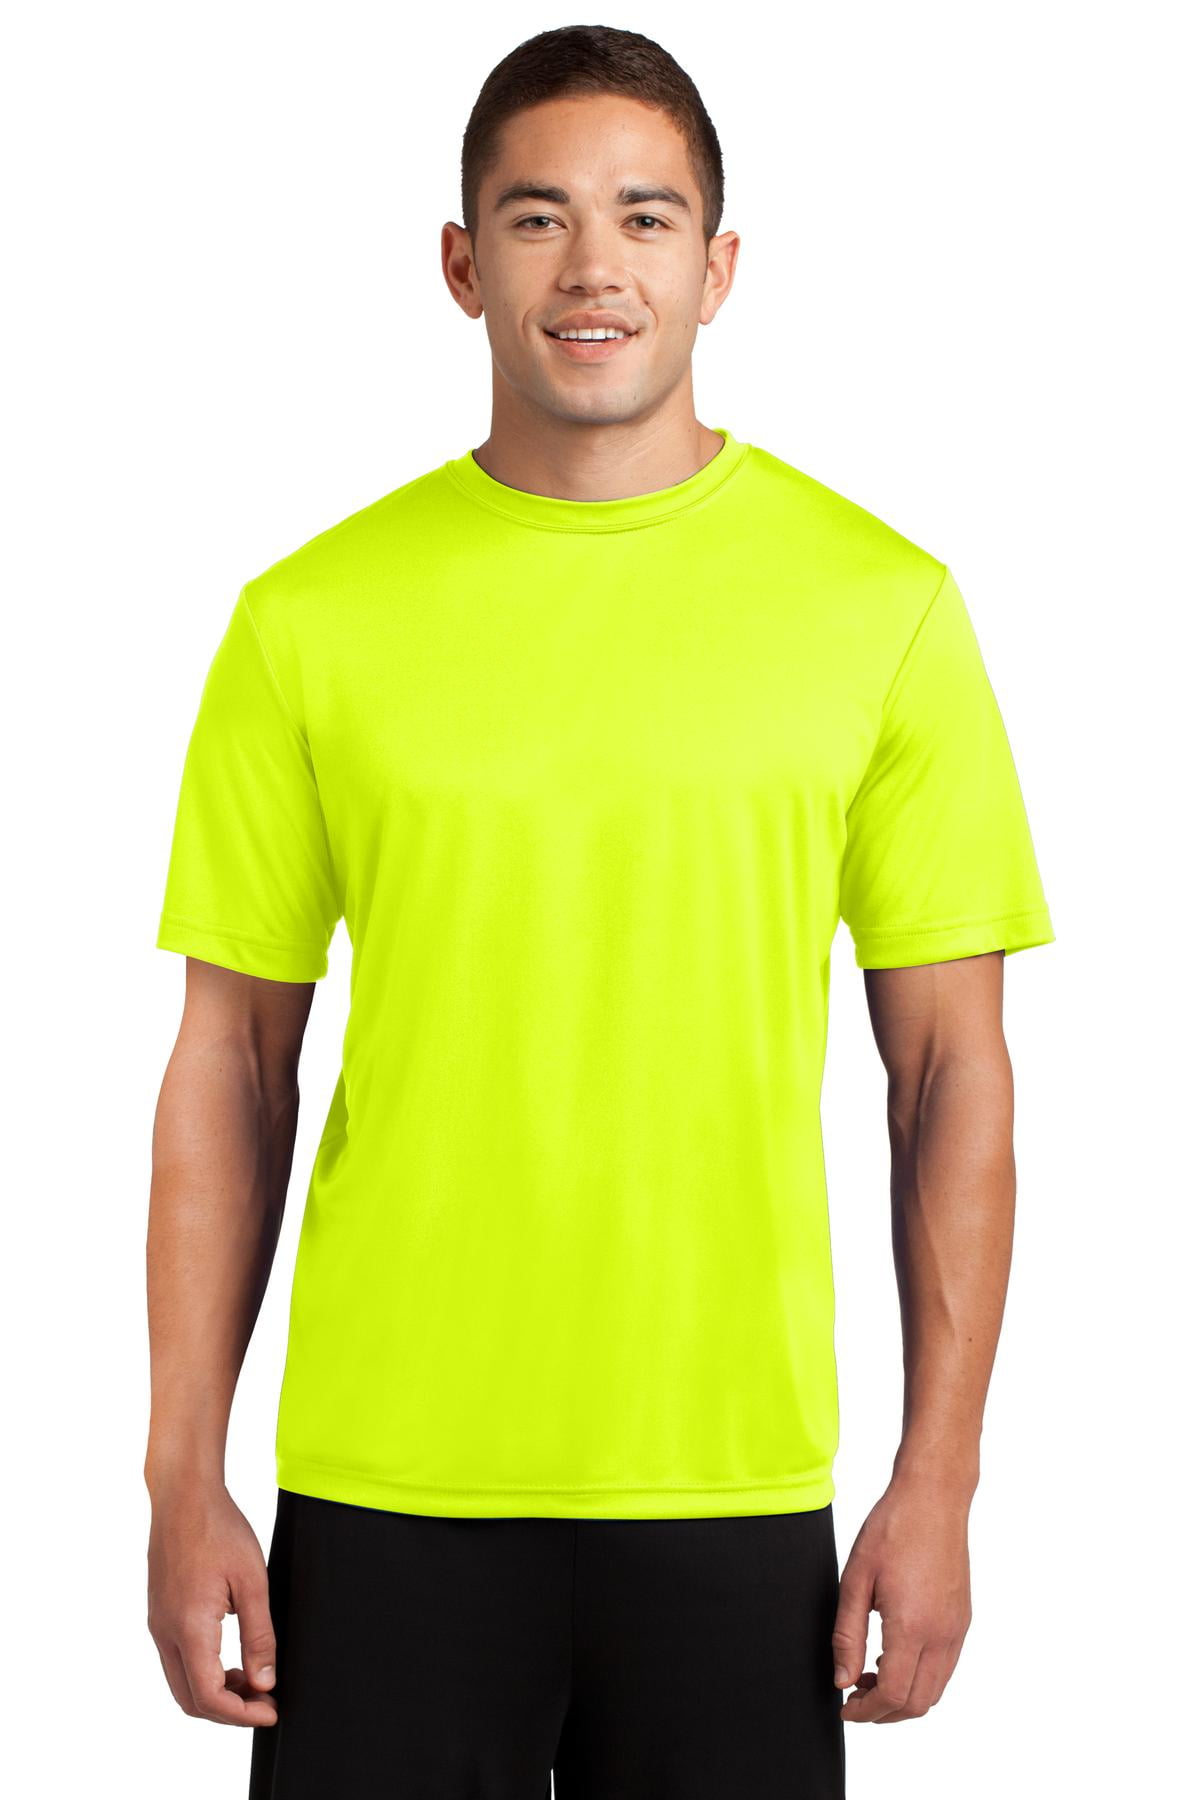 Buy online Men Polyester Sports T-shirt from Sports Wear for Men